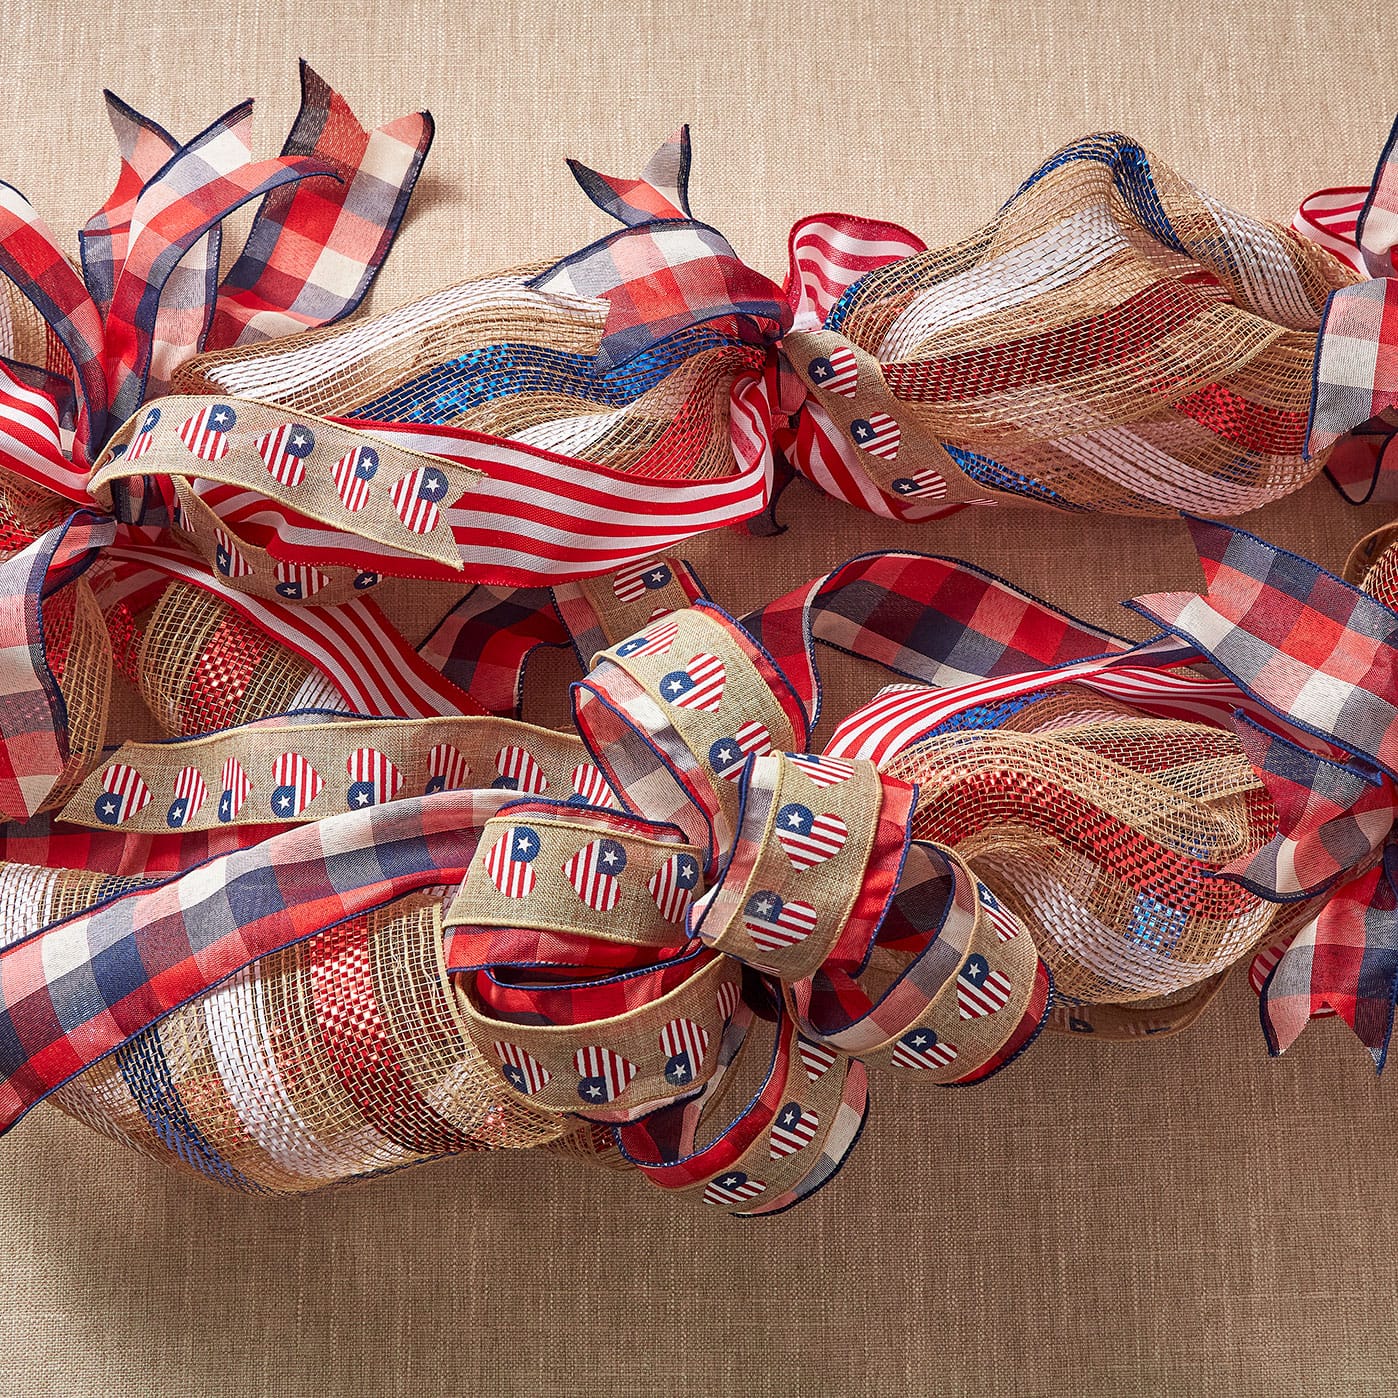 Red, White and Blue Ribbon Garland, Projects